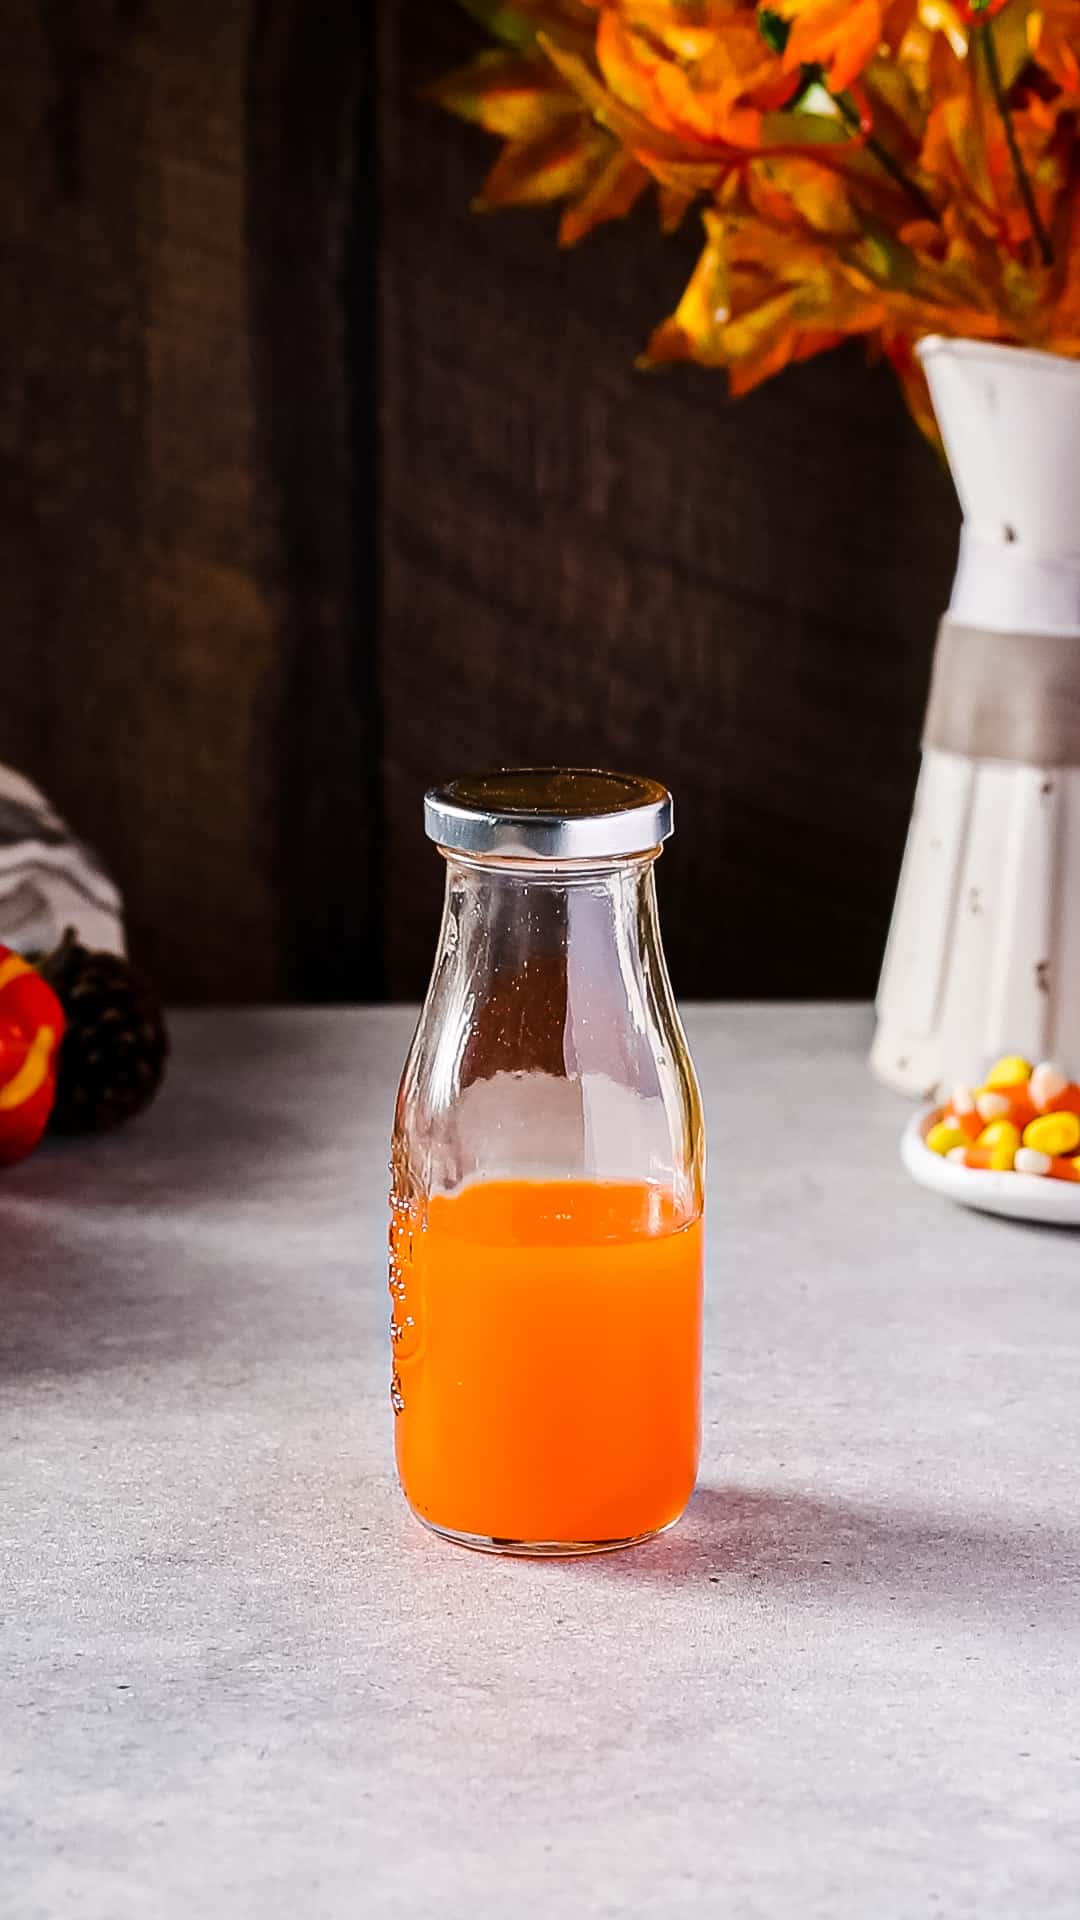 Bottle filled with orange liquid and capped with a silver cap on a tabletop. Candy corn and autumn leaves are in the background.